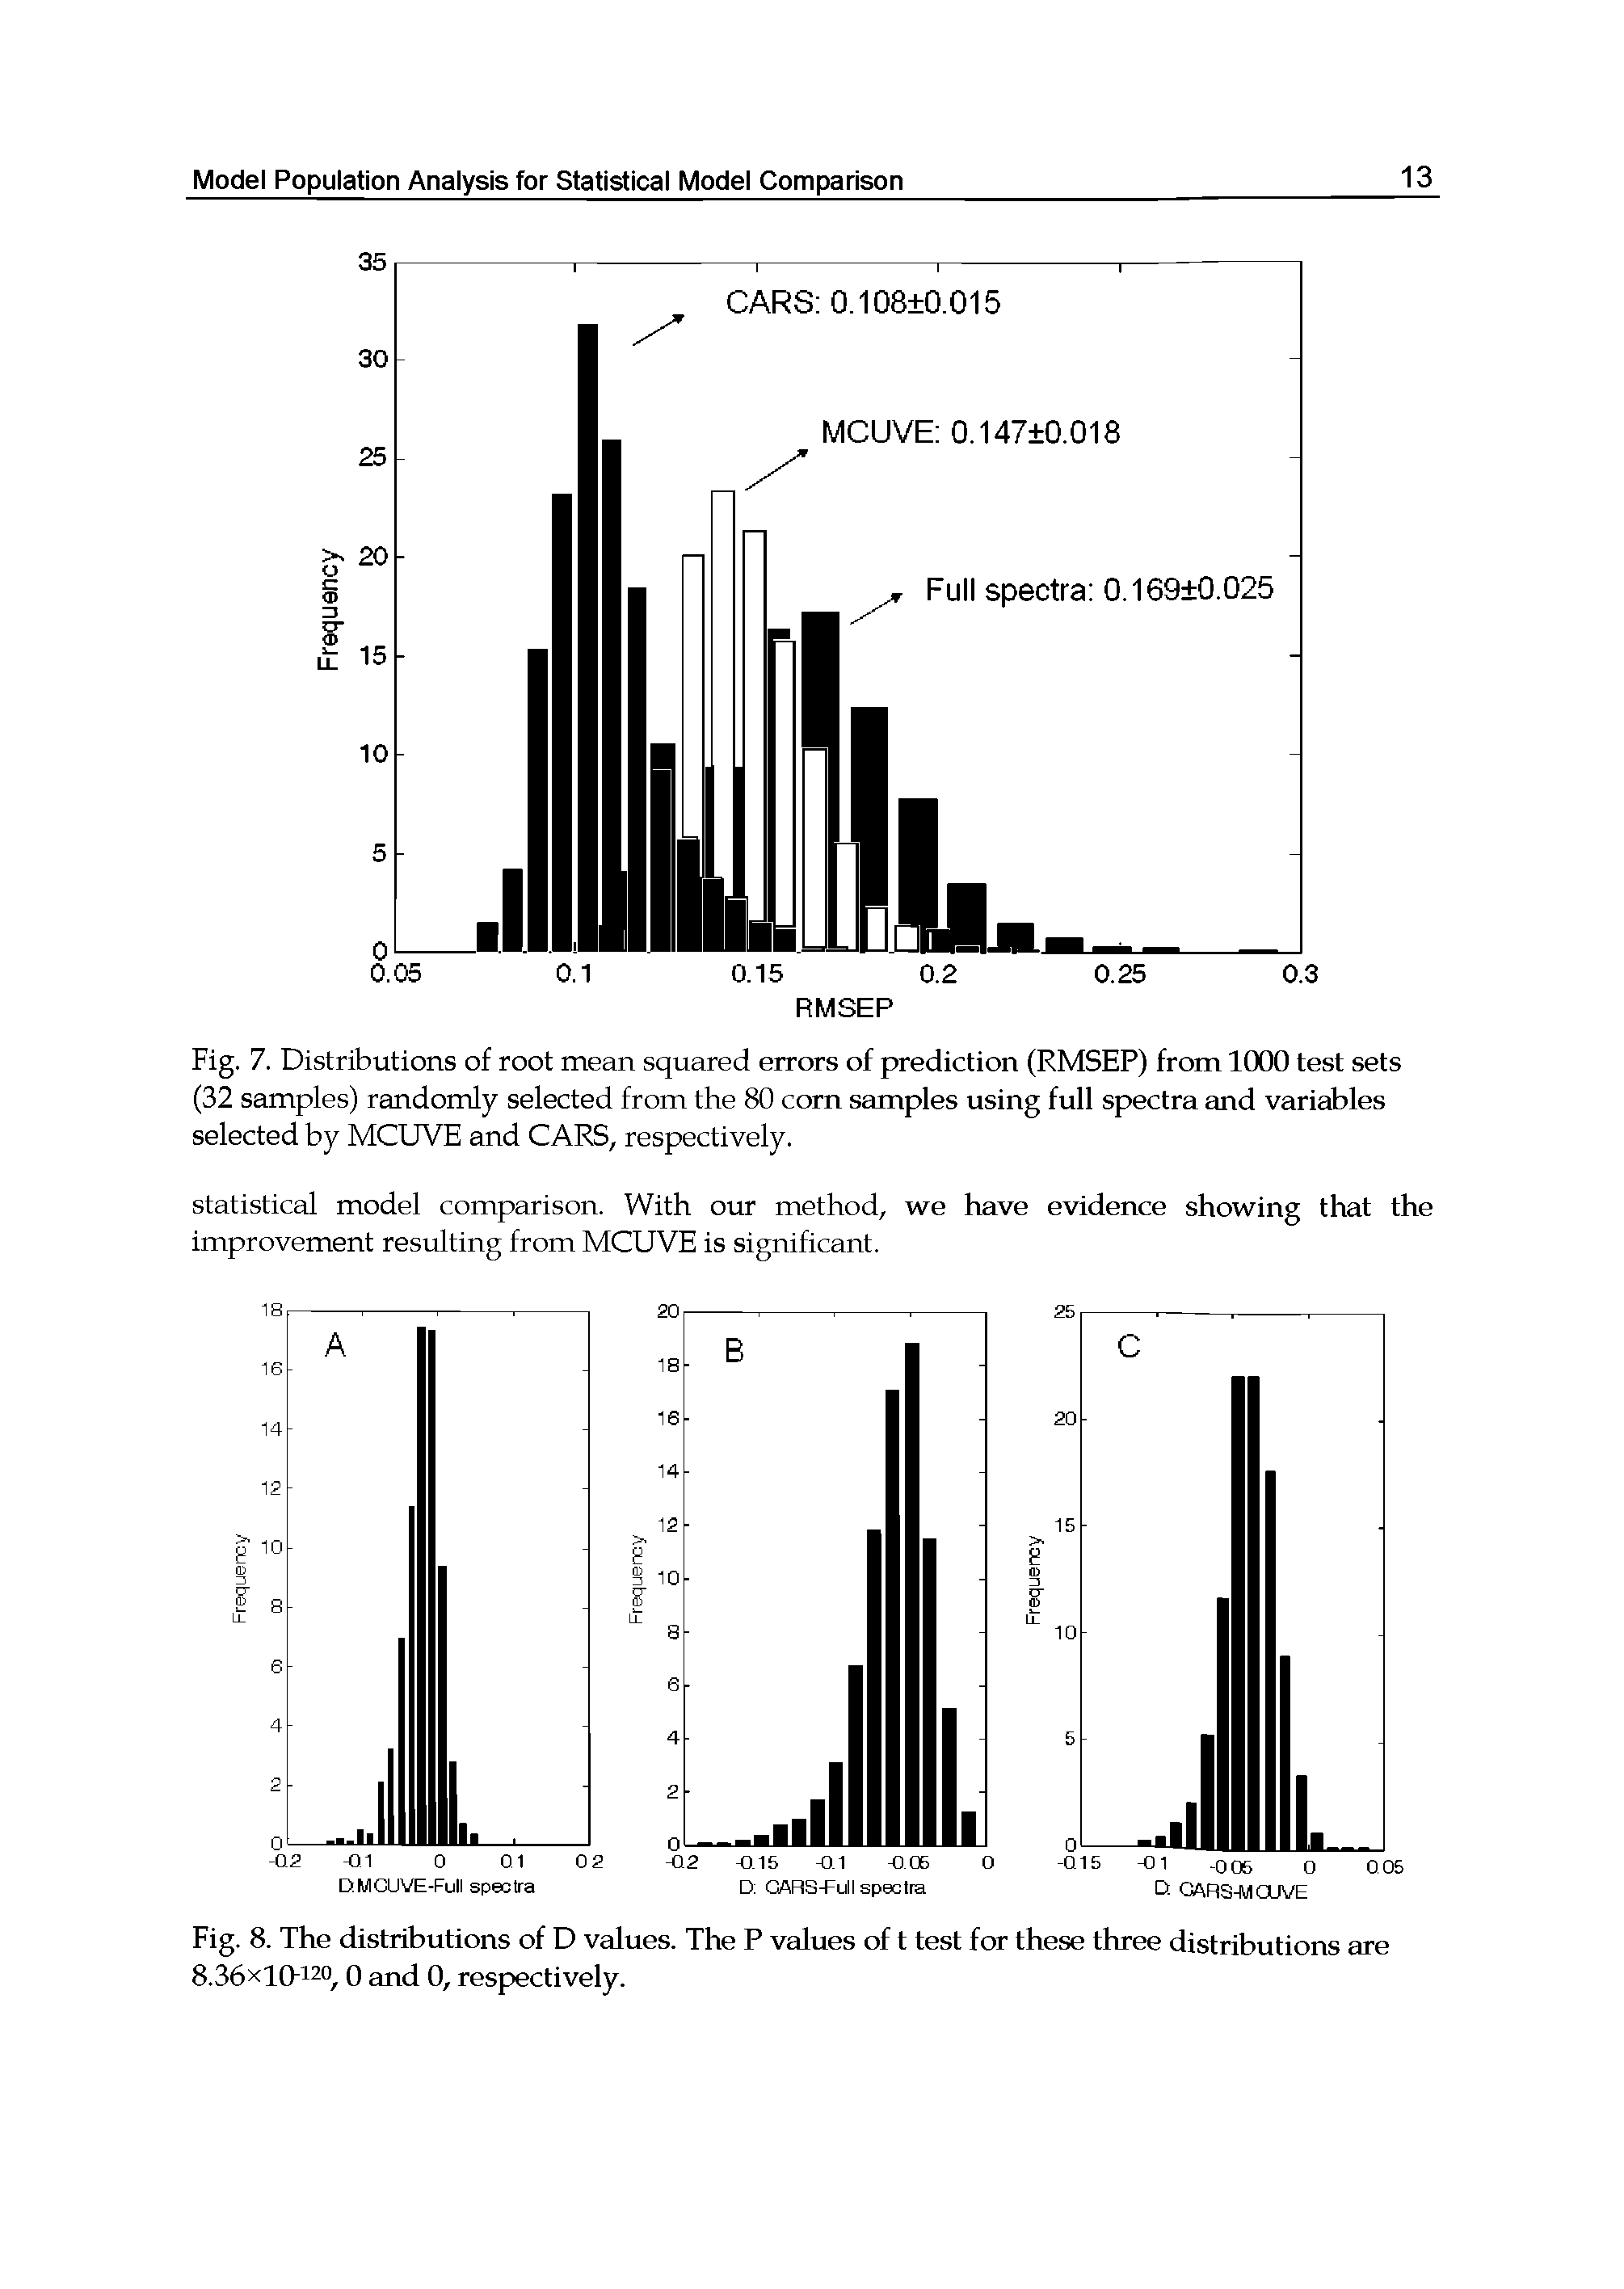 Fig. 7. Distributions of root mean squared errors of prediction (RMSEP) from 1000 test sets (32 samples) randomly selected from the 80 corn samples using full spectra and variables selected by MCUVE and CARS, respectively.